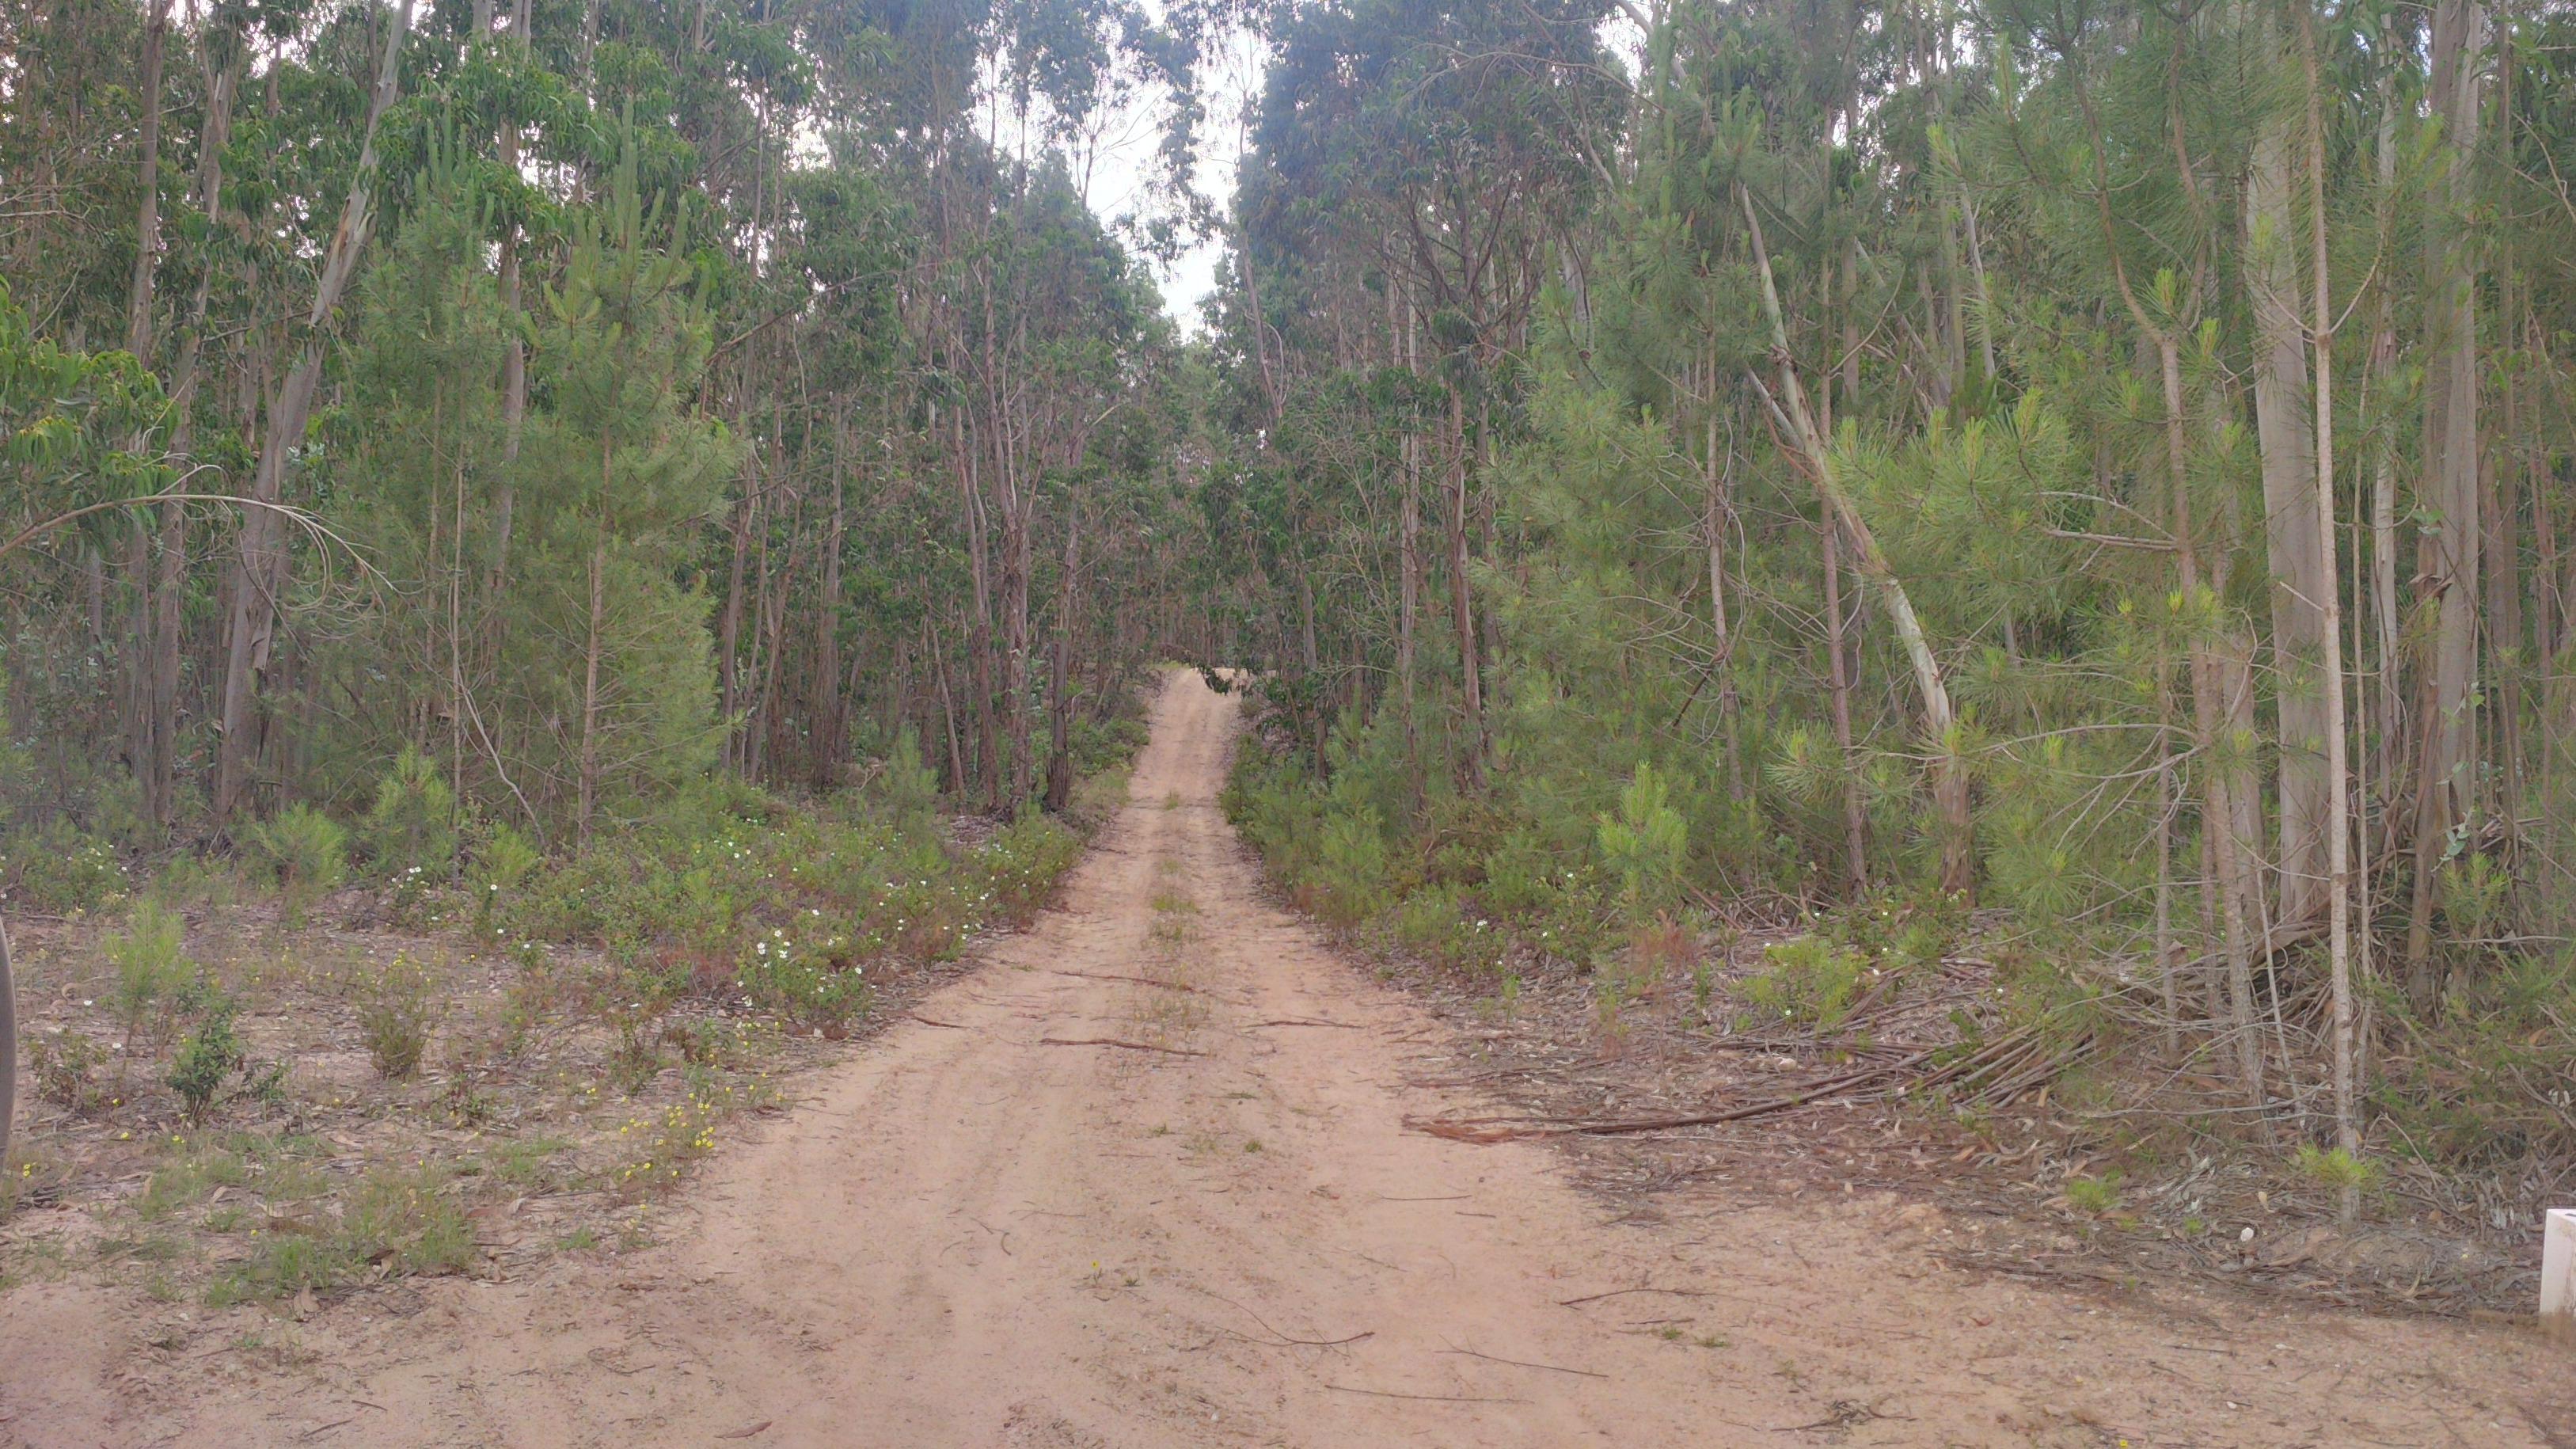  Portugal -eucalyptus forest for sale.   Ref P01